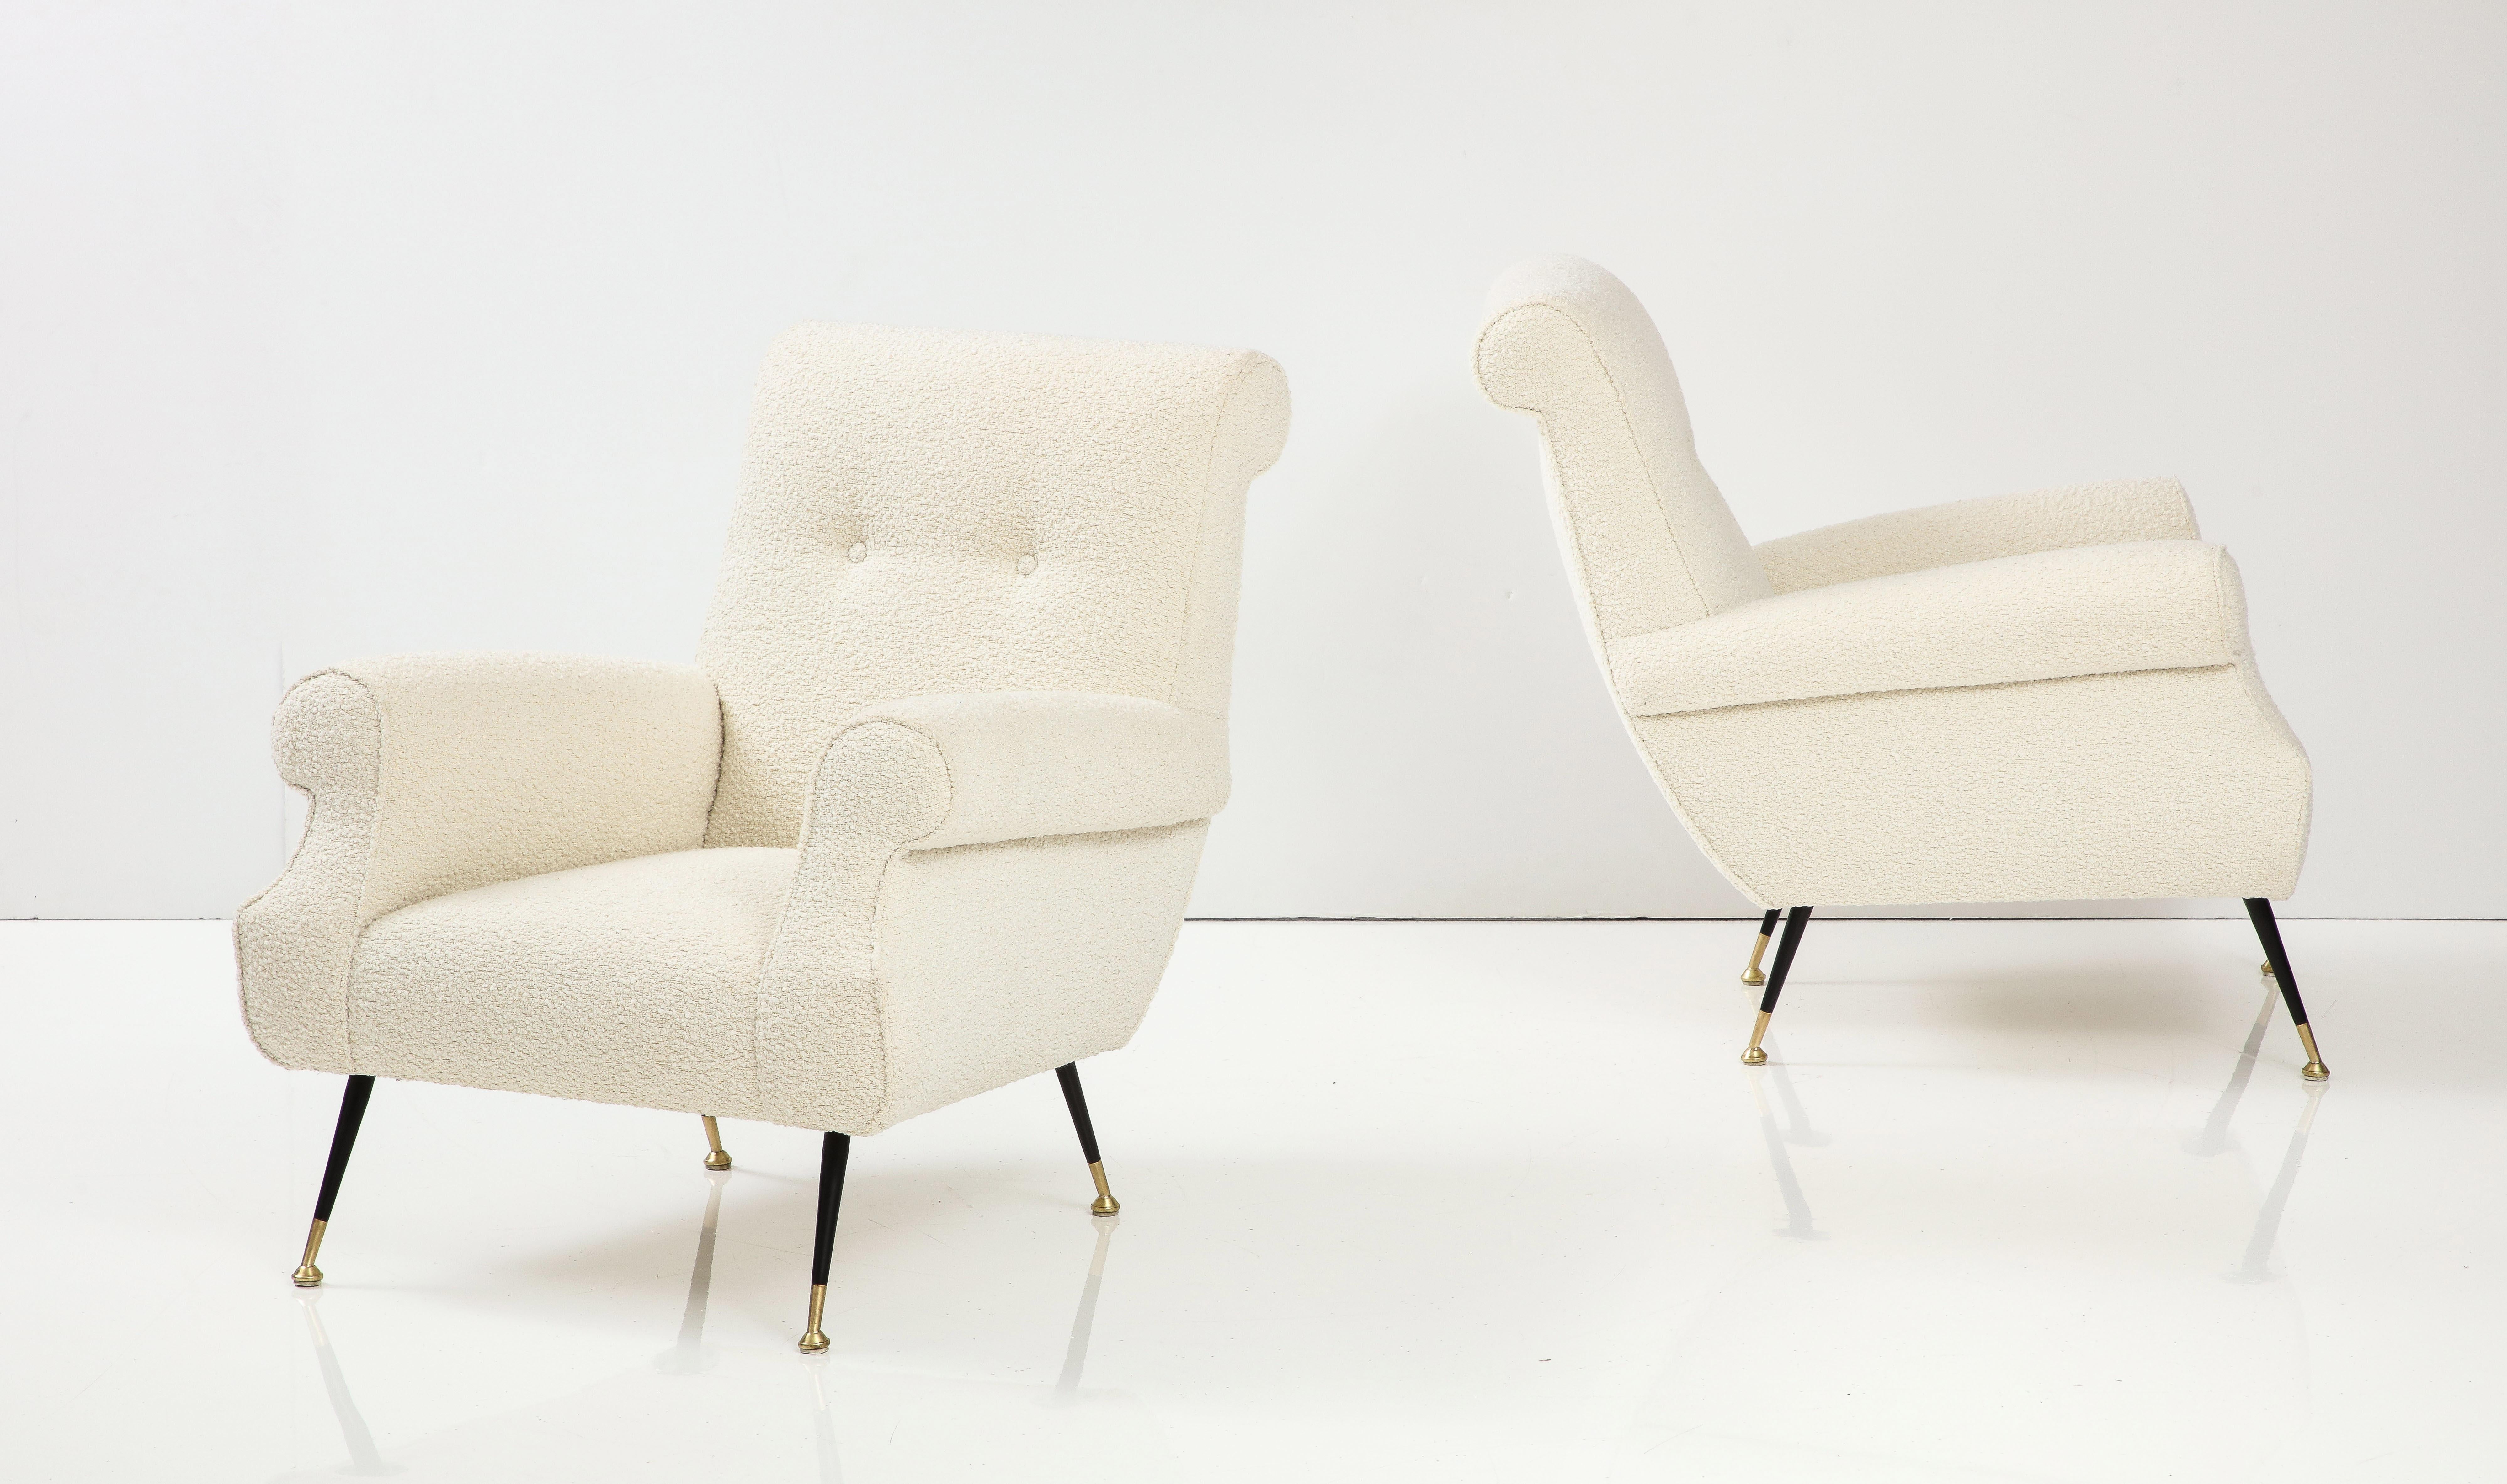 Pair of Italian Modernist Lounge Chairs, Italy, circa 1950 For Sale 4